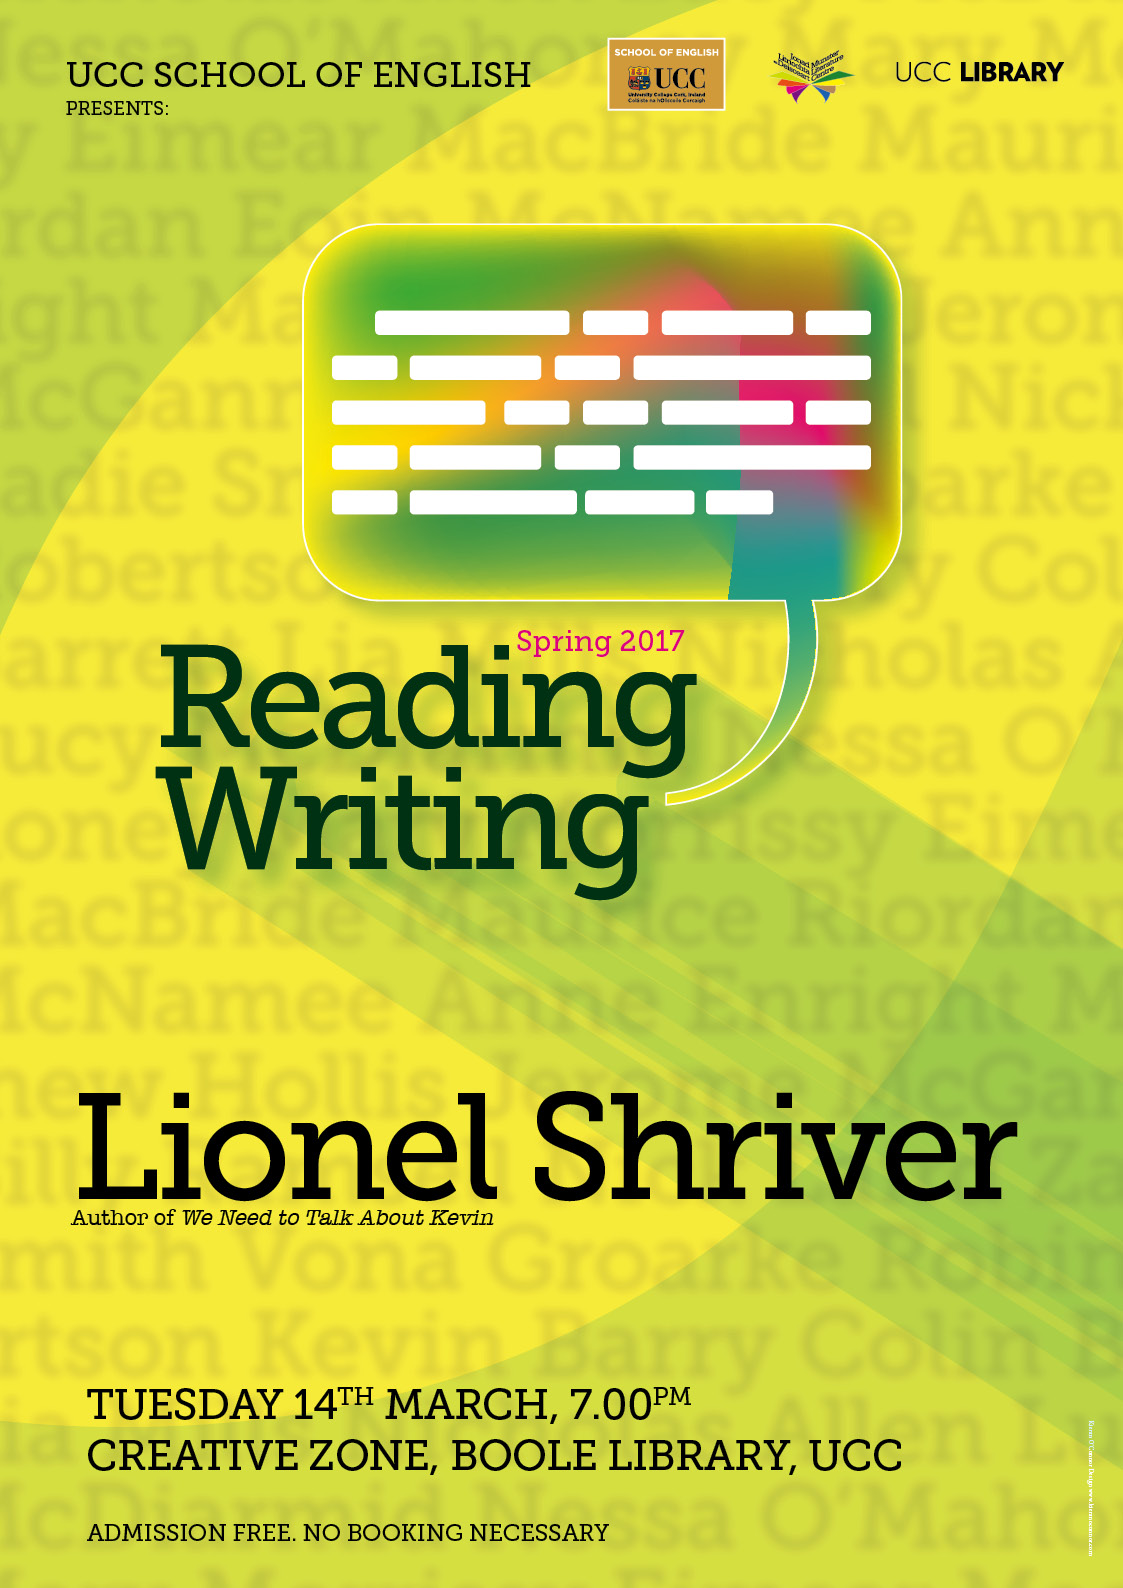 Lionel Shriver to read at UCC